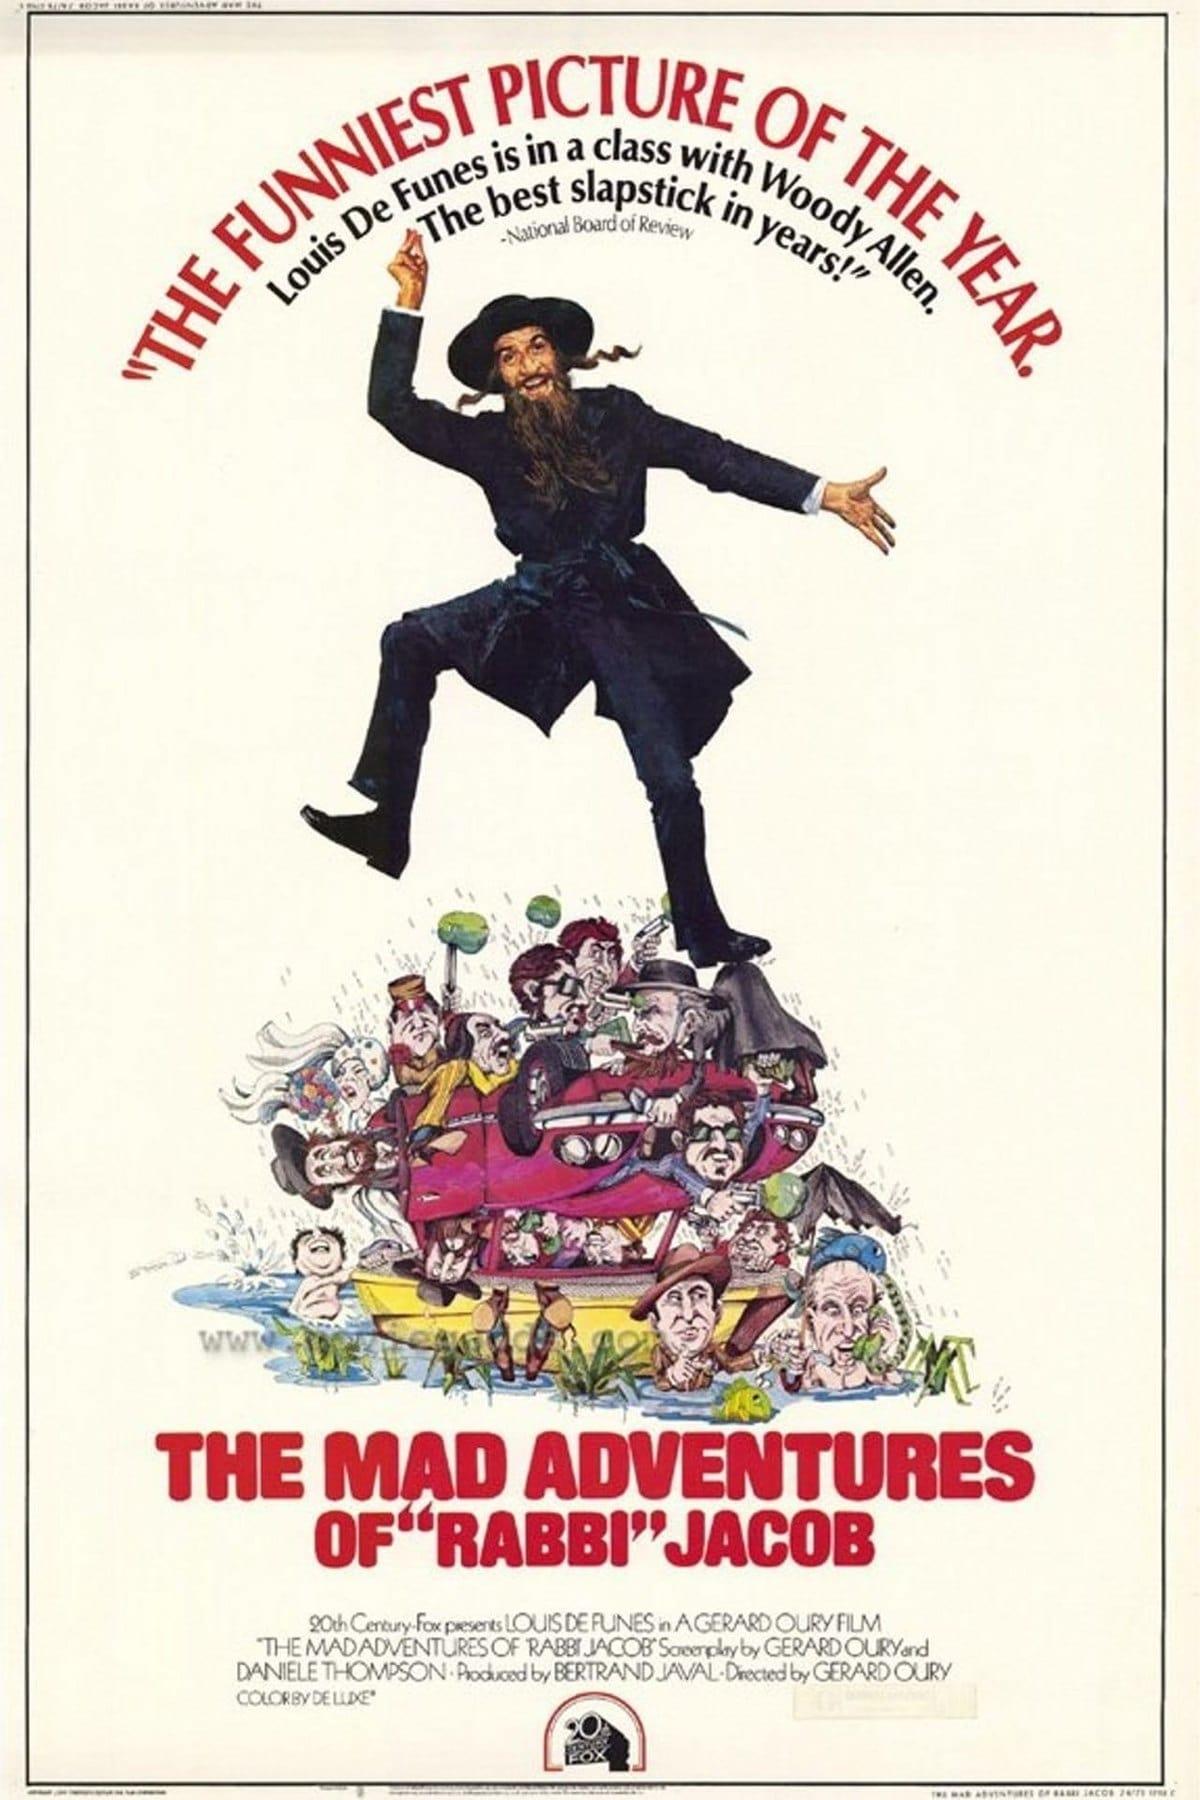 The Mad Adventures of Rabbi Jacob poster